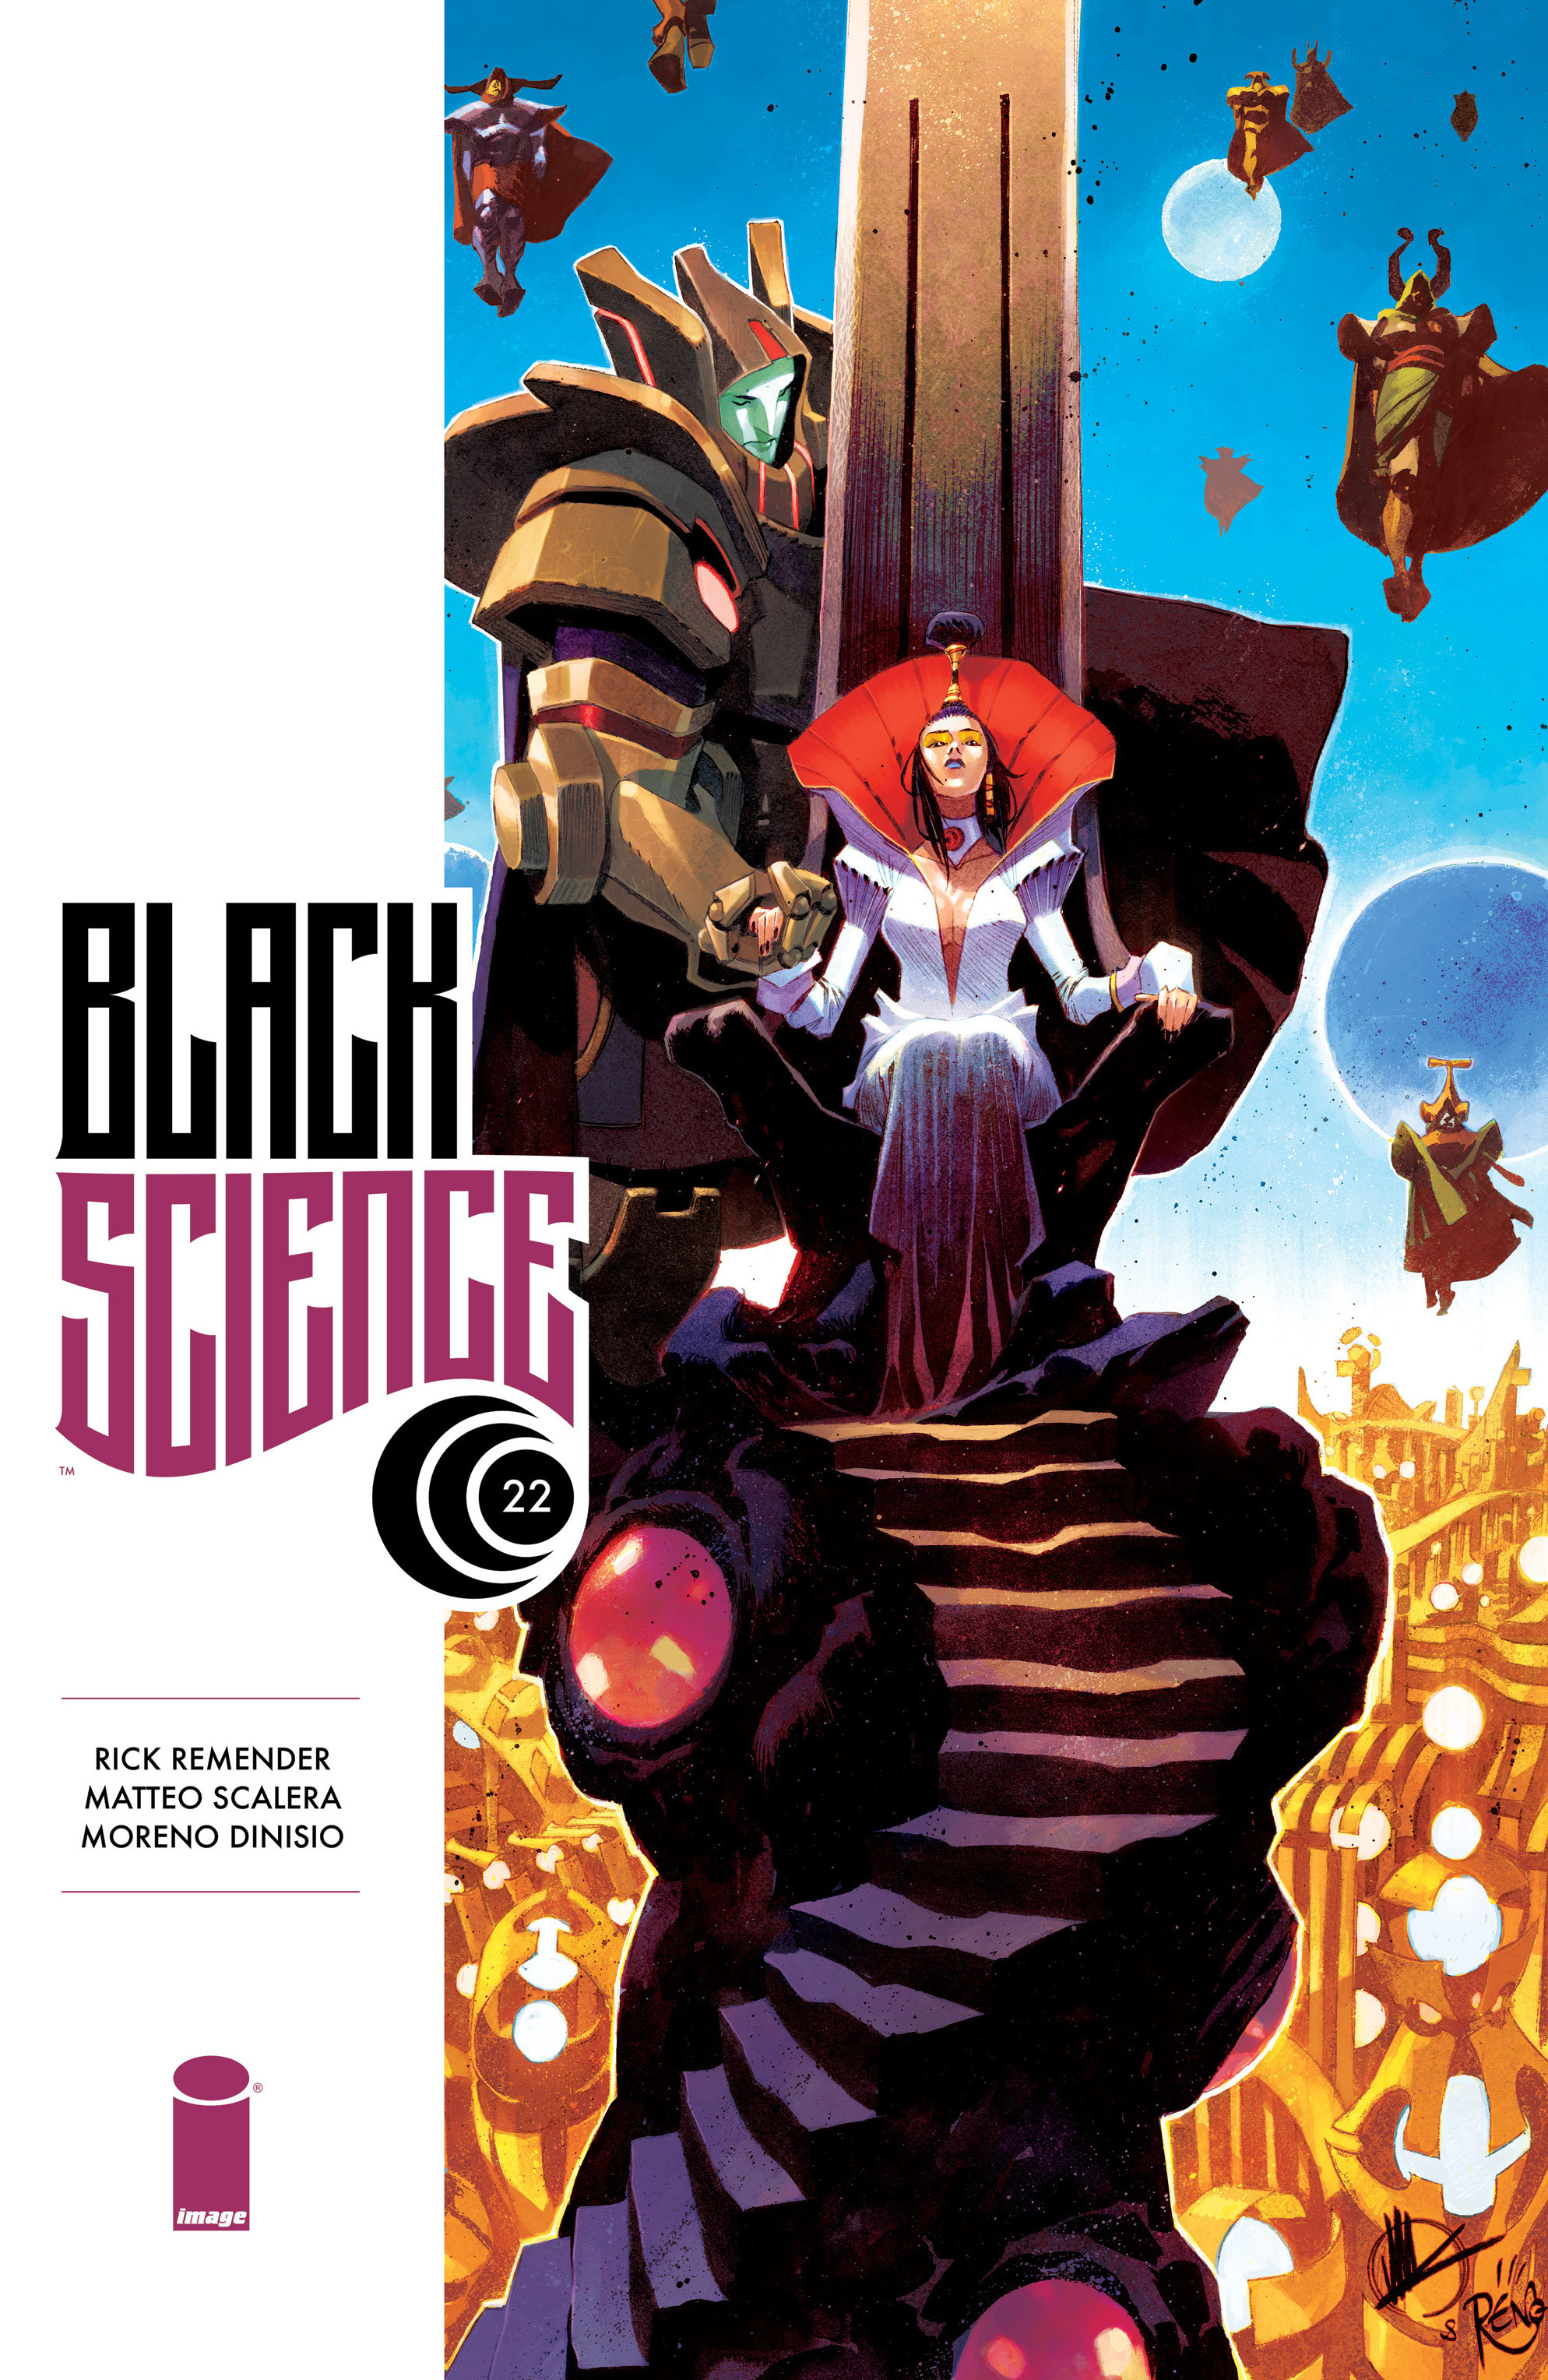 Read online Black Science comic -  Issue #22 - 1